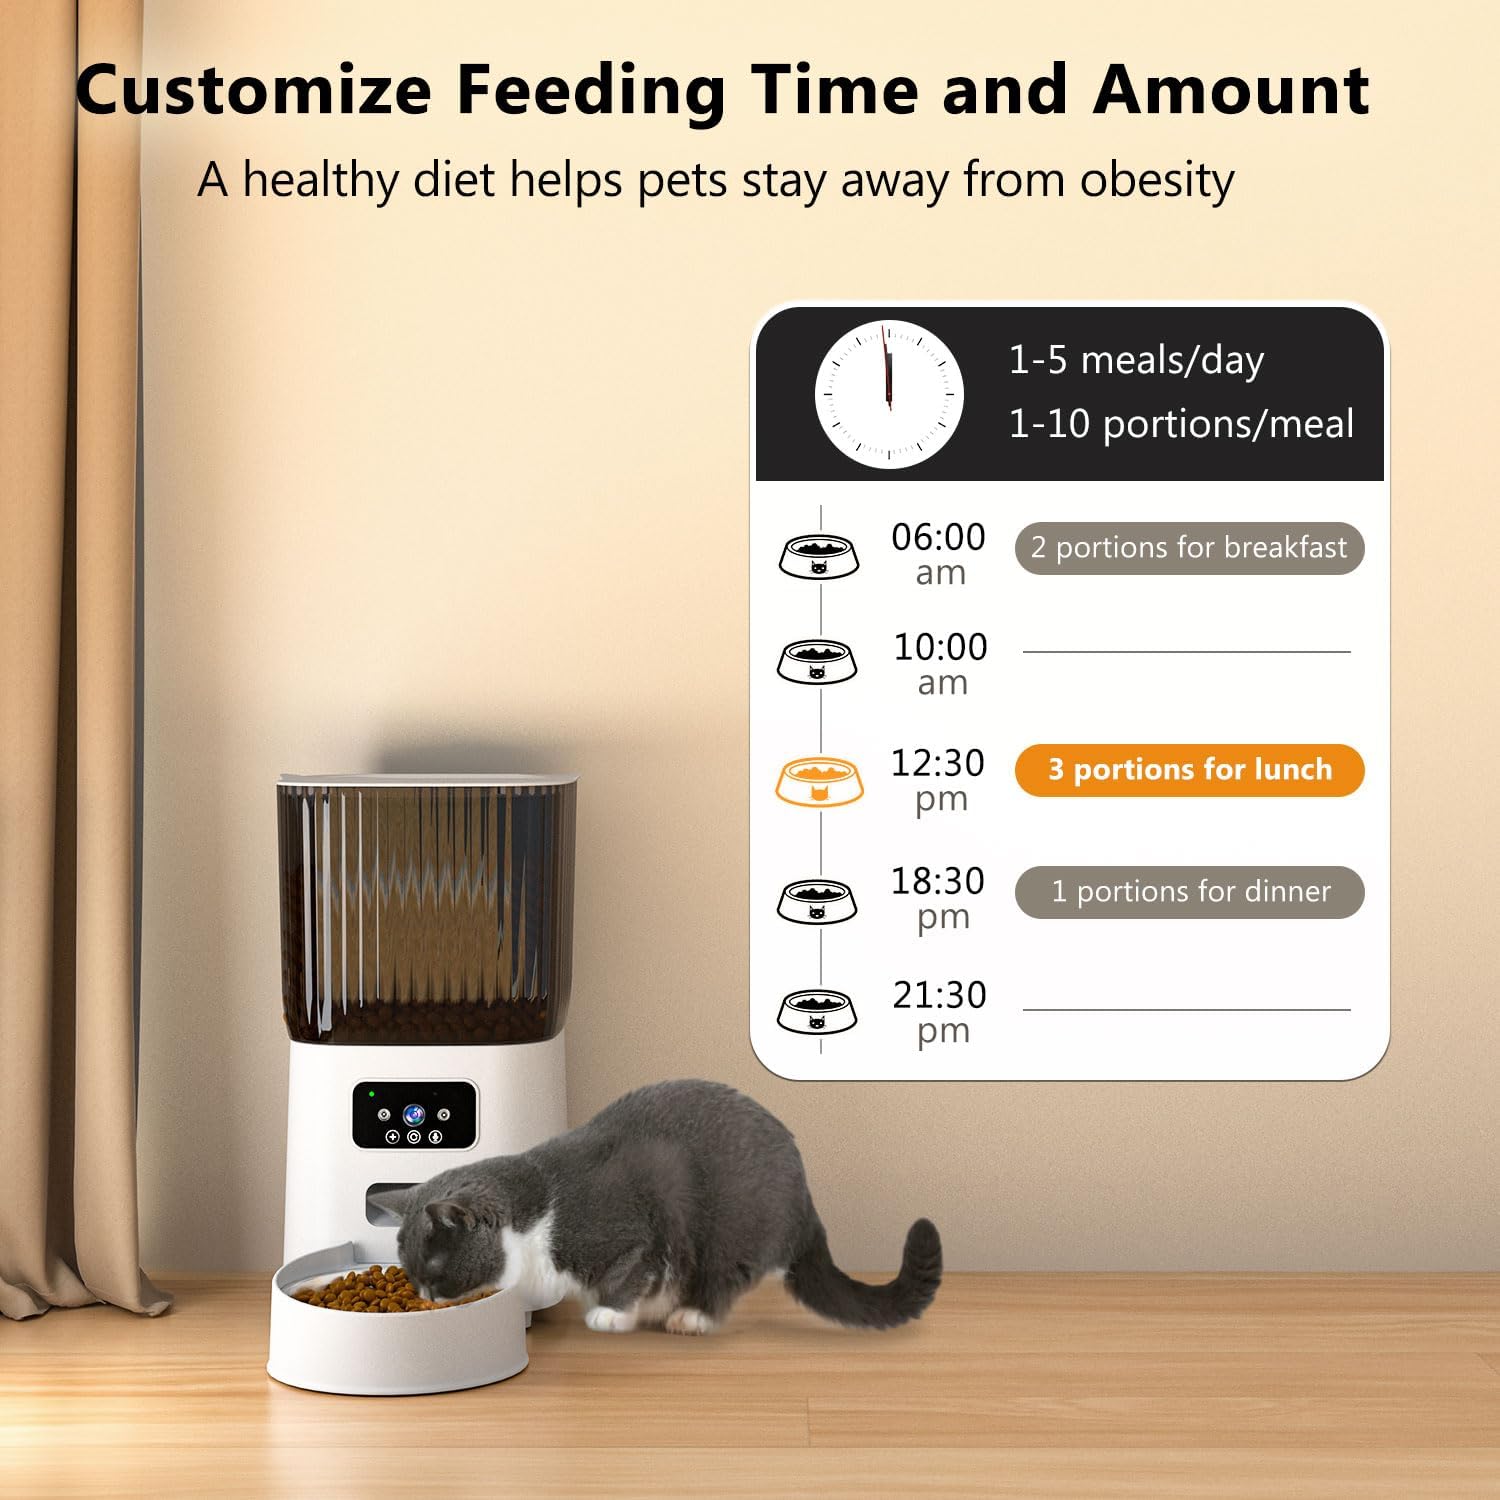 Customize Feeding Time and Amout 